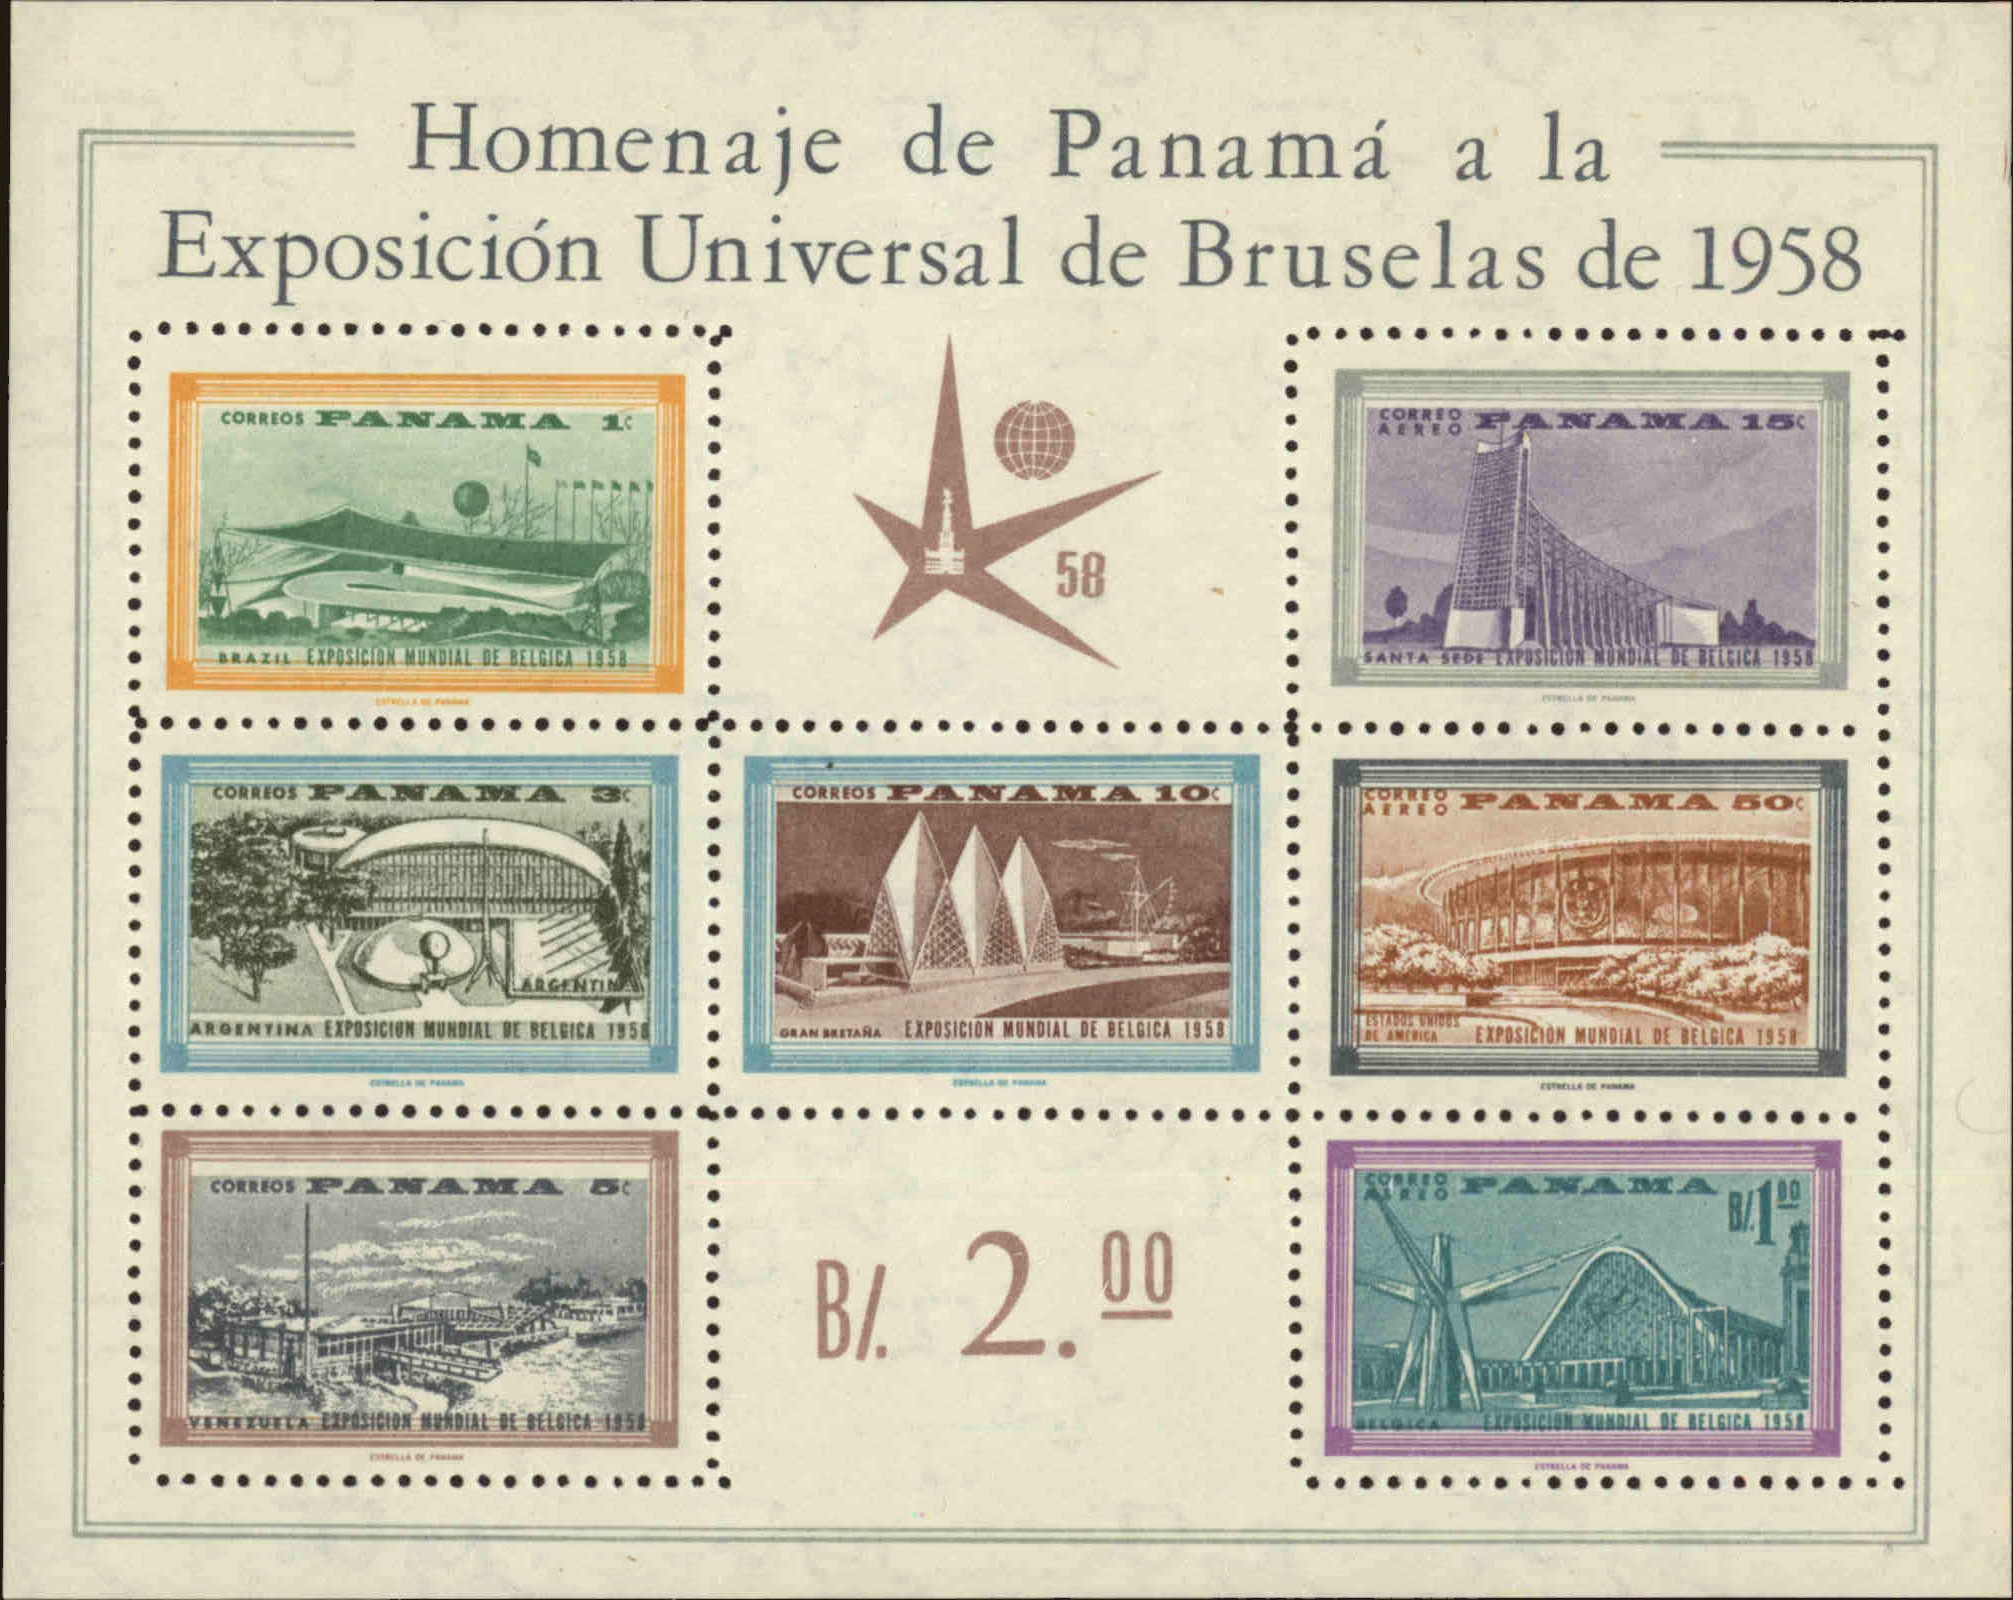 Front view of Panama C209a collectors stamp